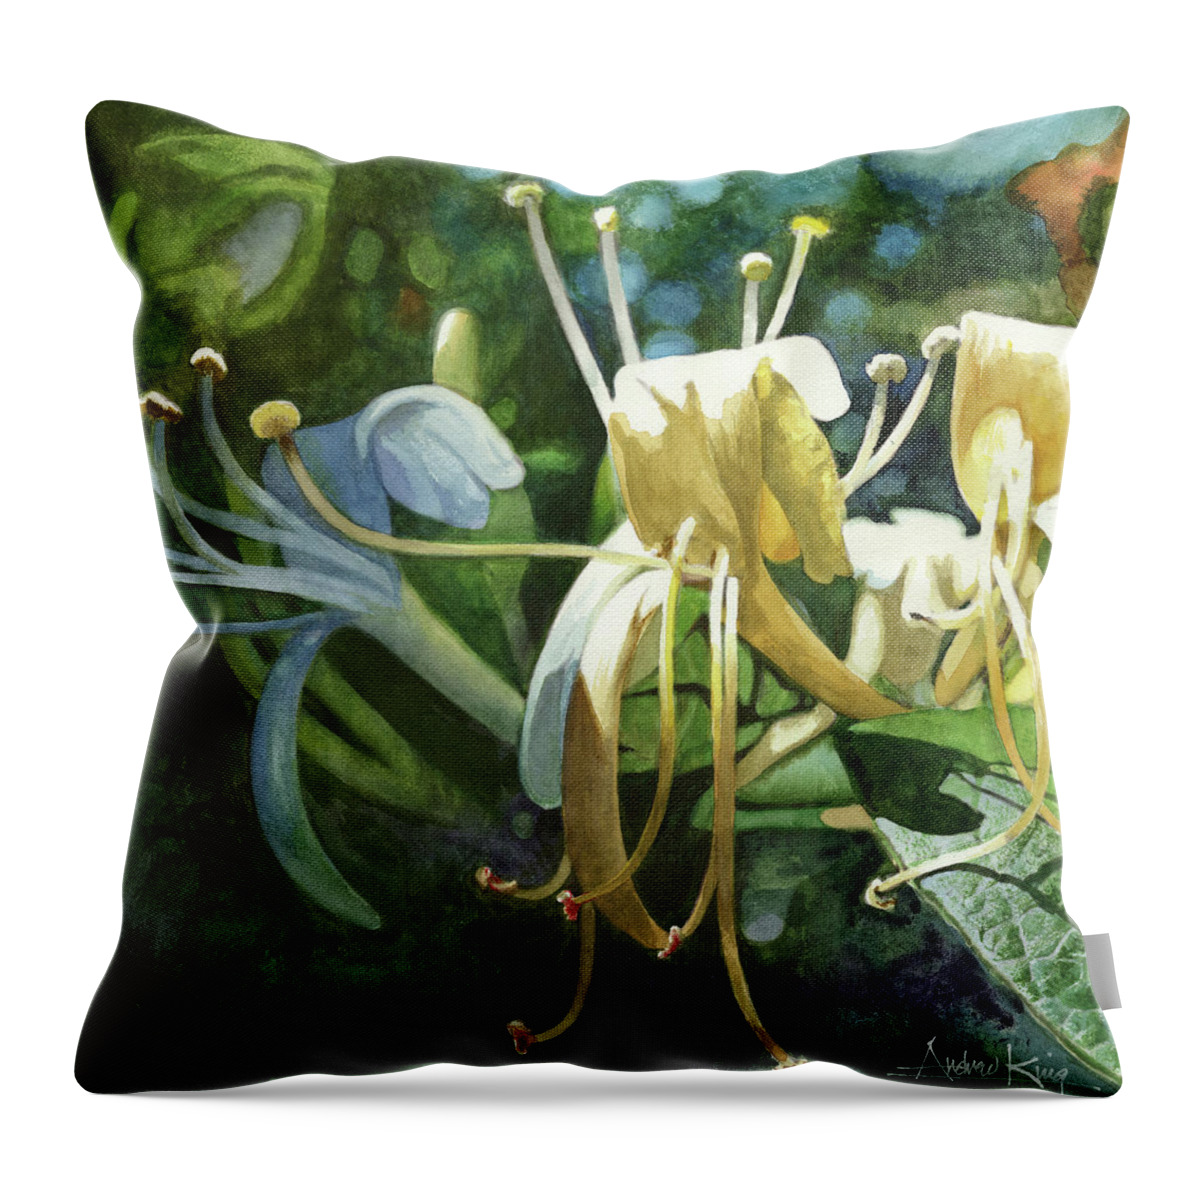 Honeysuckle Throw Pillow featuring the painting Honeysuckle Sun by Andrew King